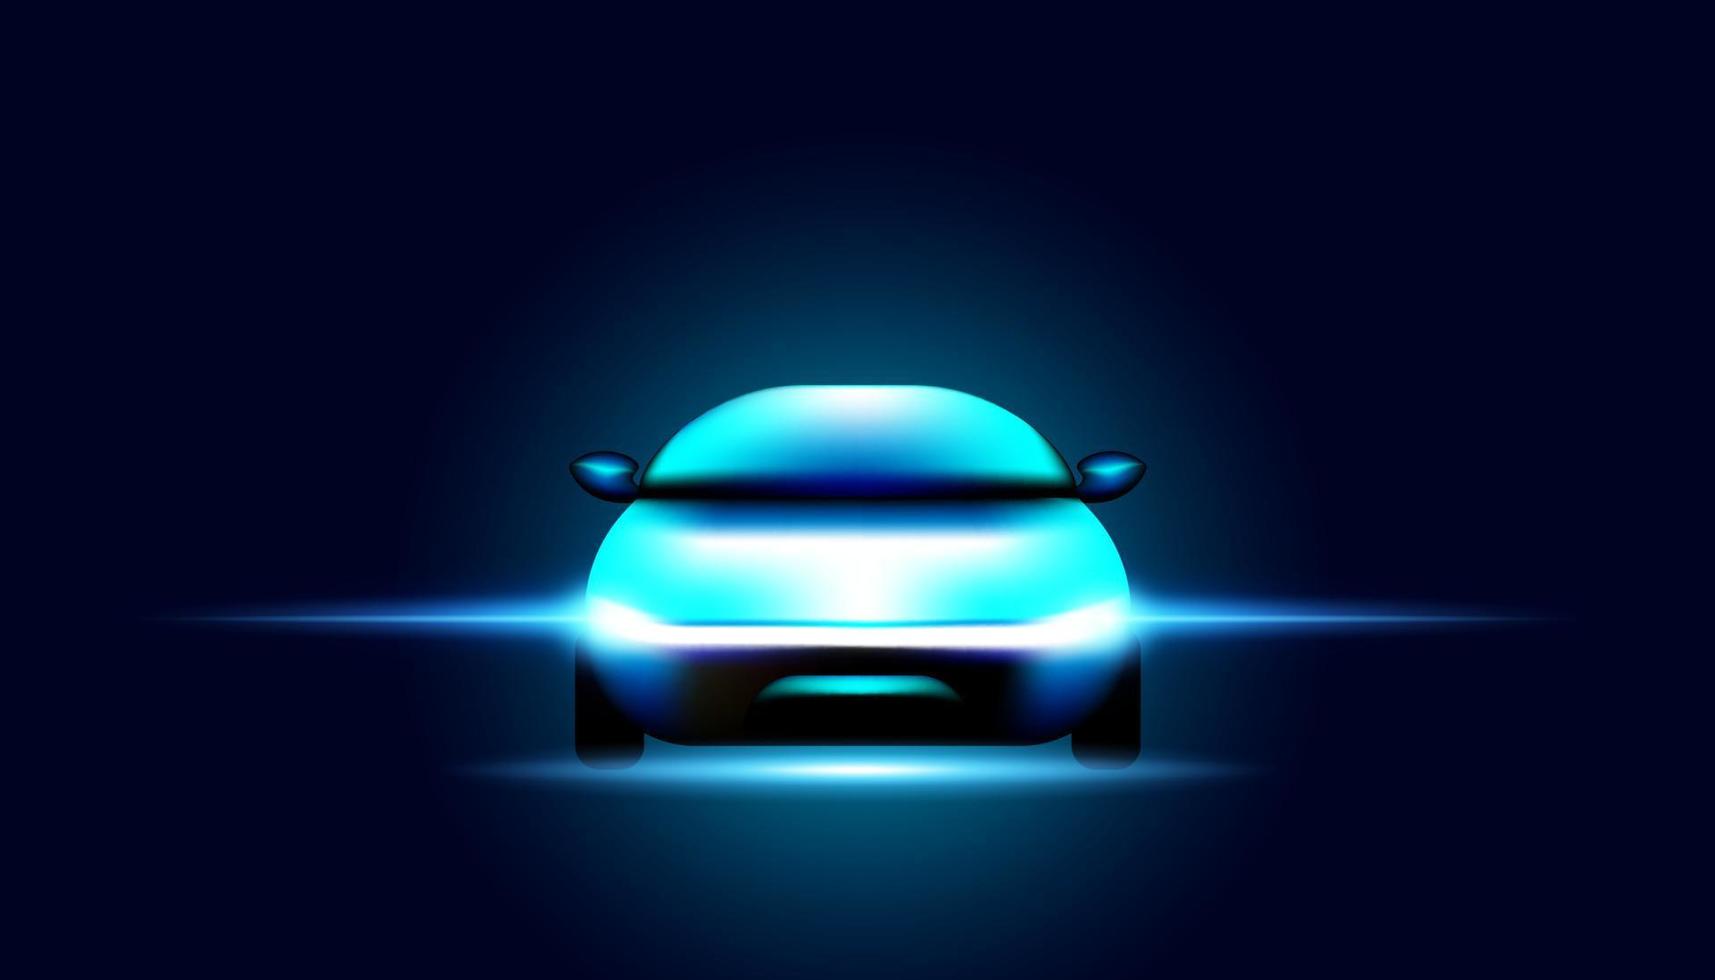 Abstract electric vehicle concept Electric energy stored in batteries or electric energy storage devices. On a modern background Futuristic Digital vector